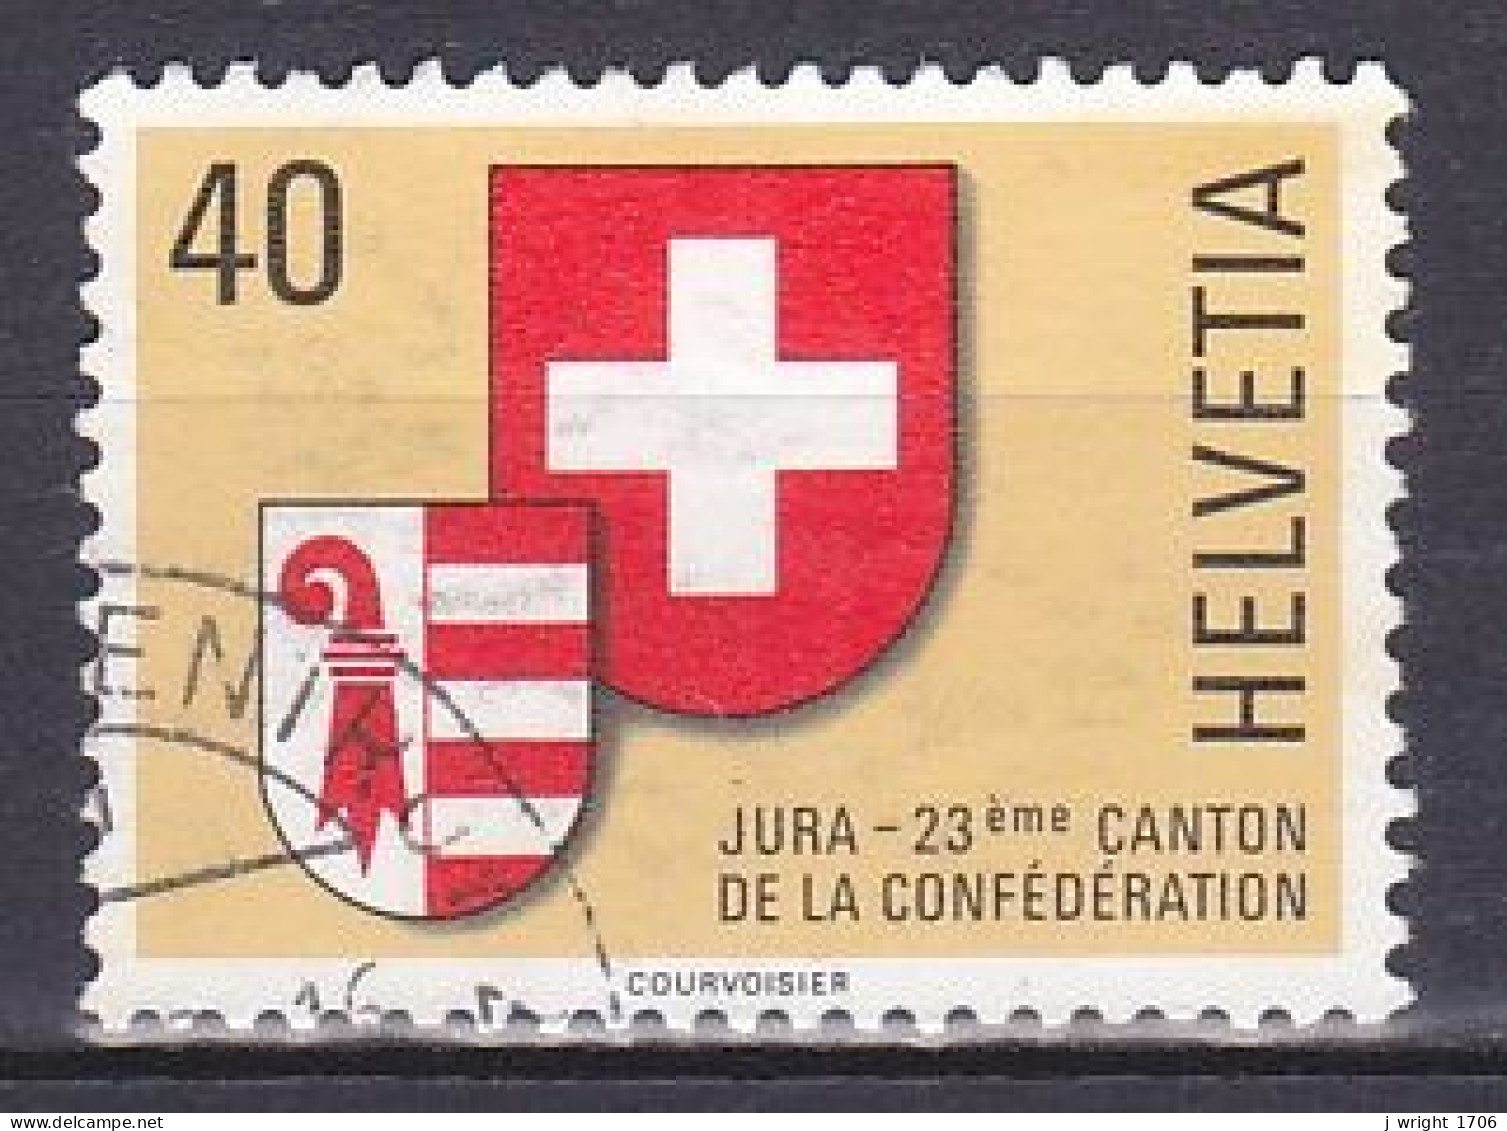 Switzerland, 1978, Jura 23rd Canton, 40c, USED - Used Stamps